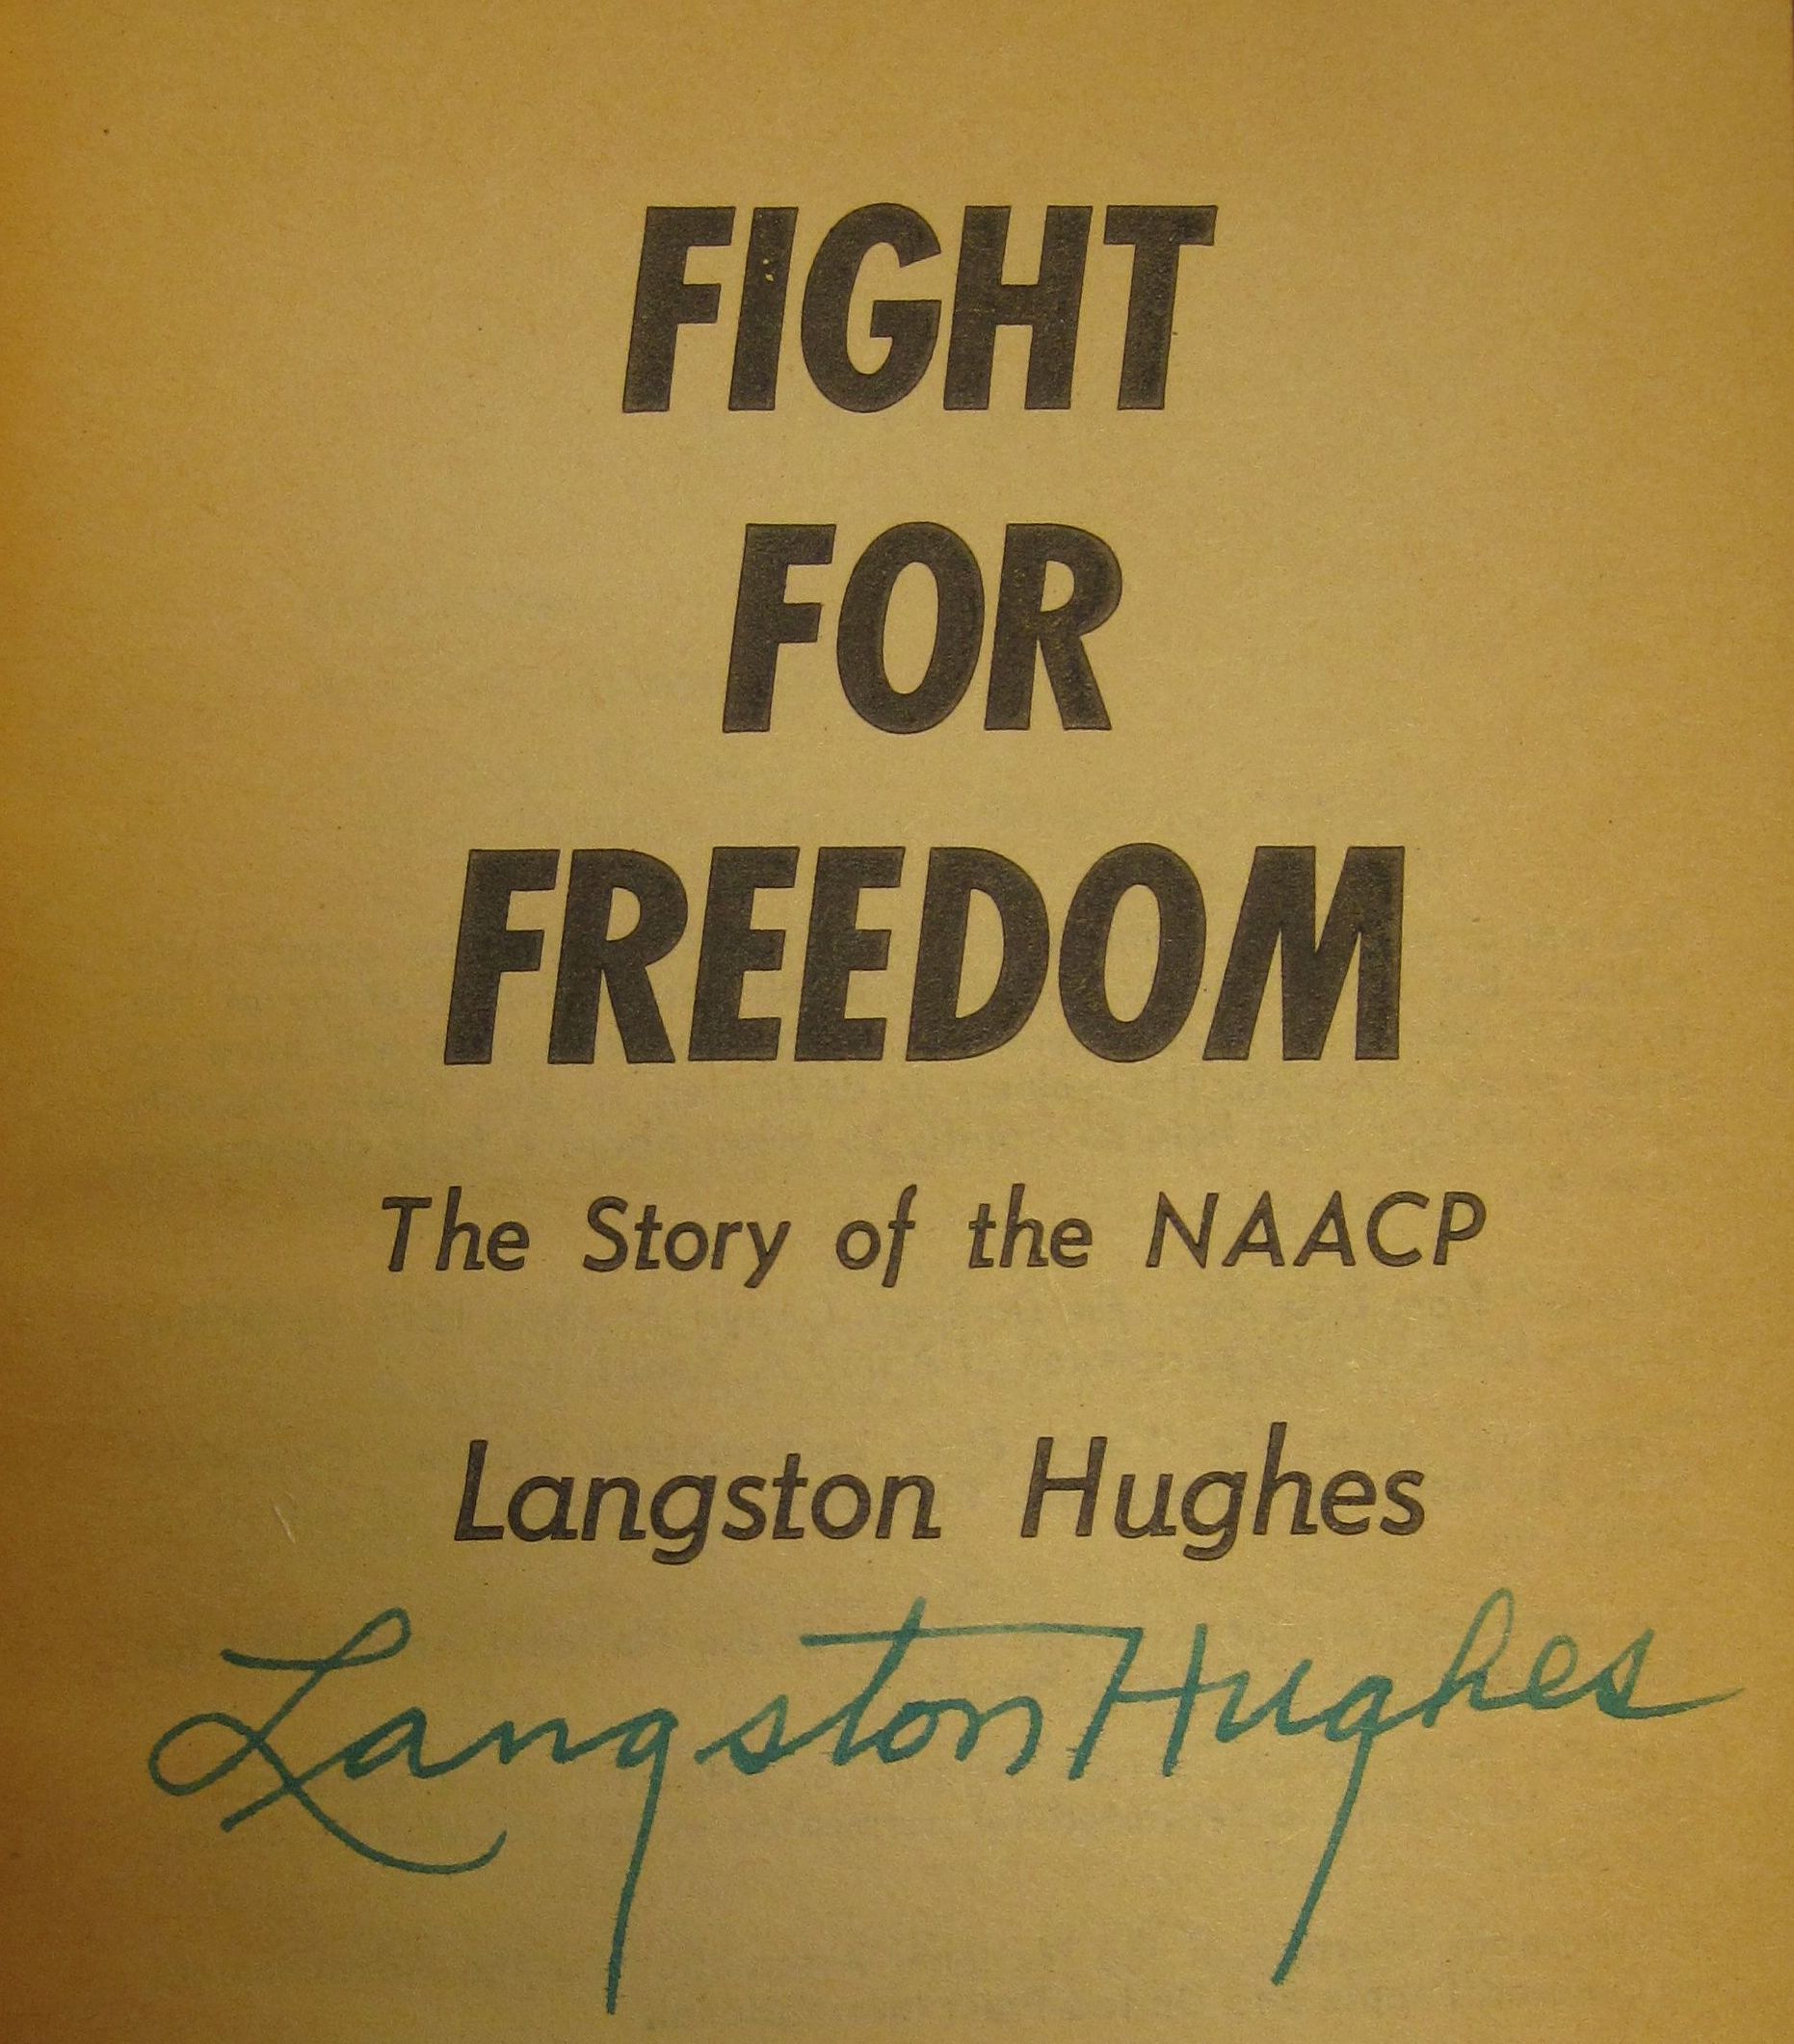 Fight for Freedom (1962) by Langston Hughes